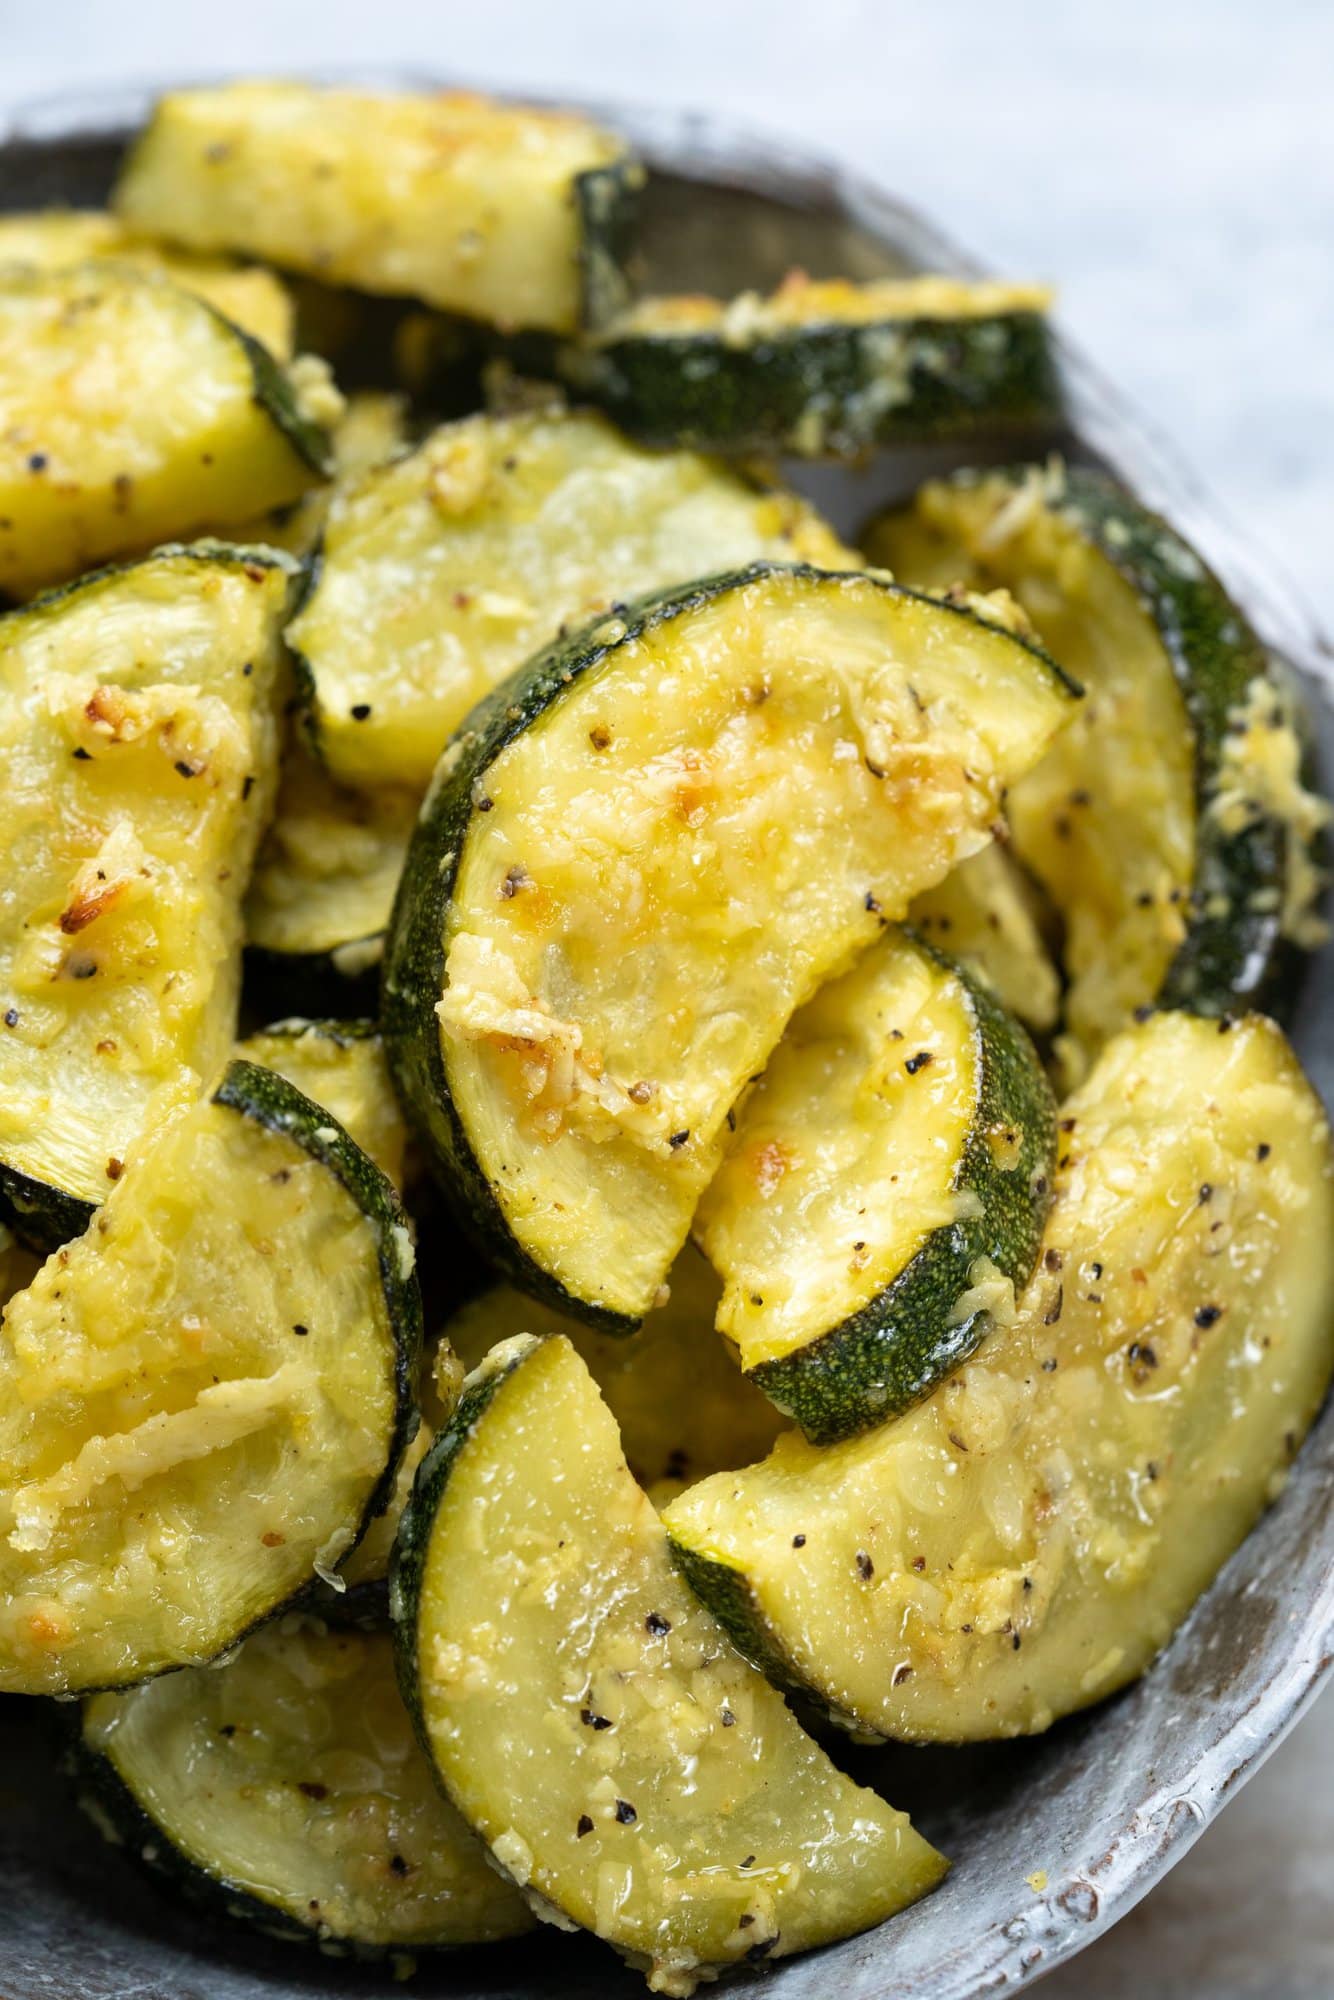 Zucchini is roasted in the oven with parmesan cheese and lemon pepper seasoning.